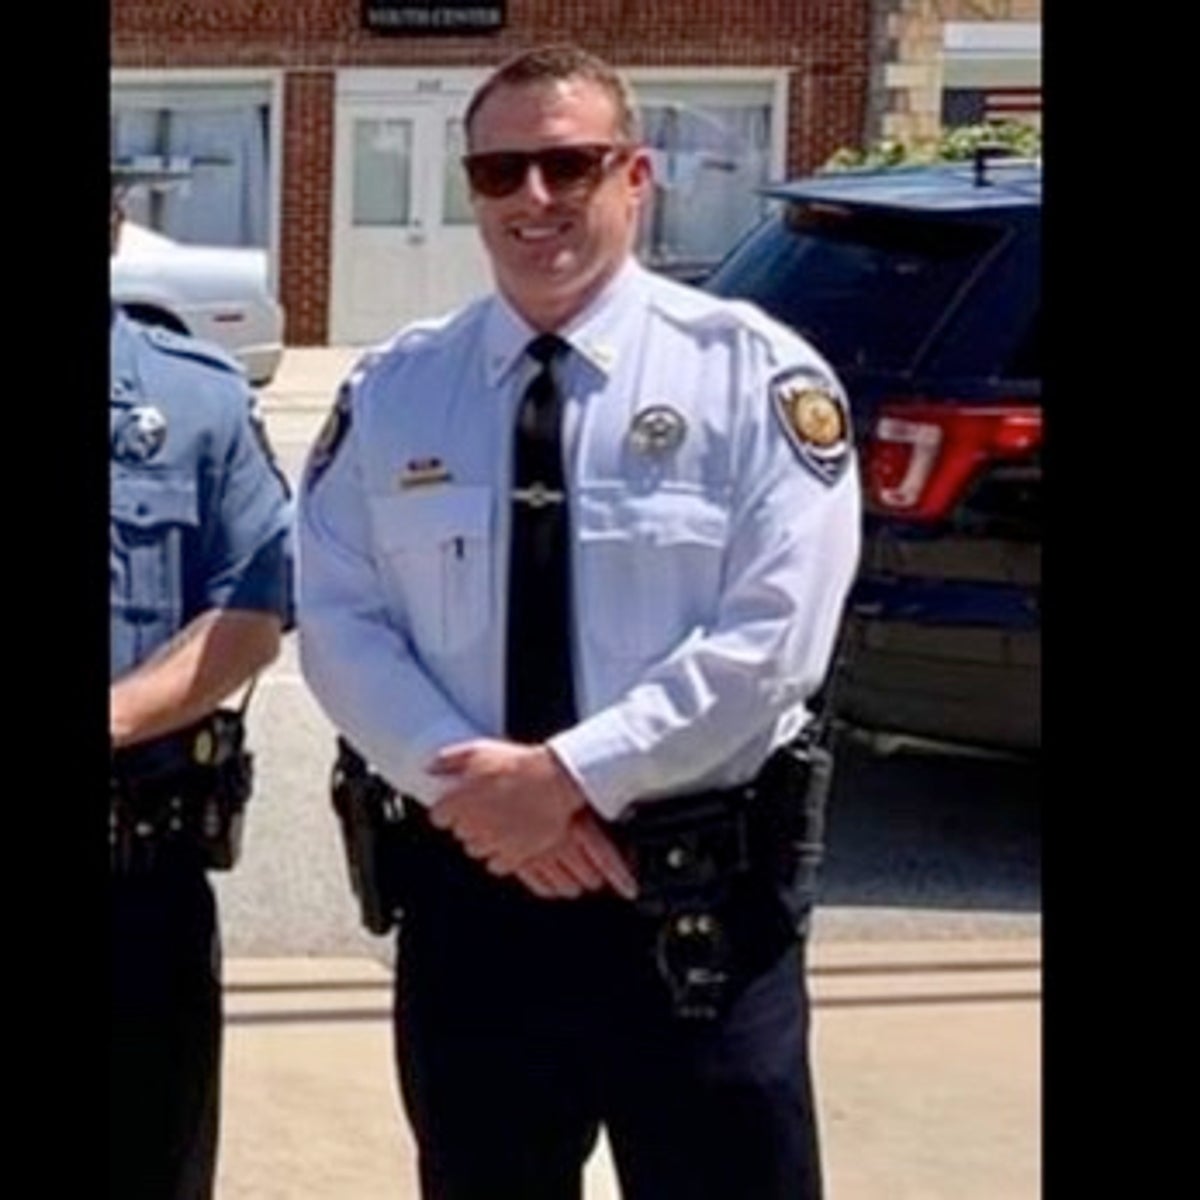 North Carolina police chief suspended for telling officers how to get